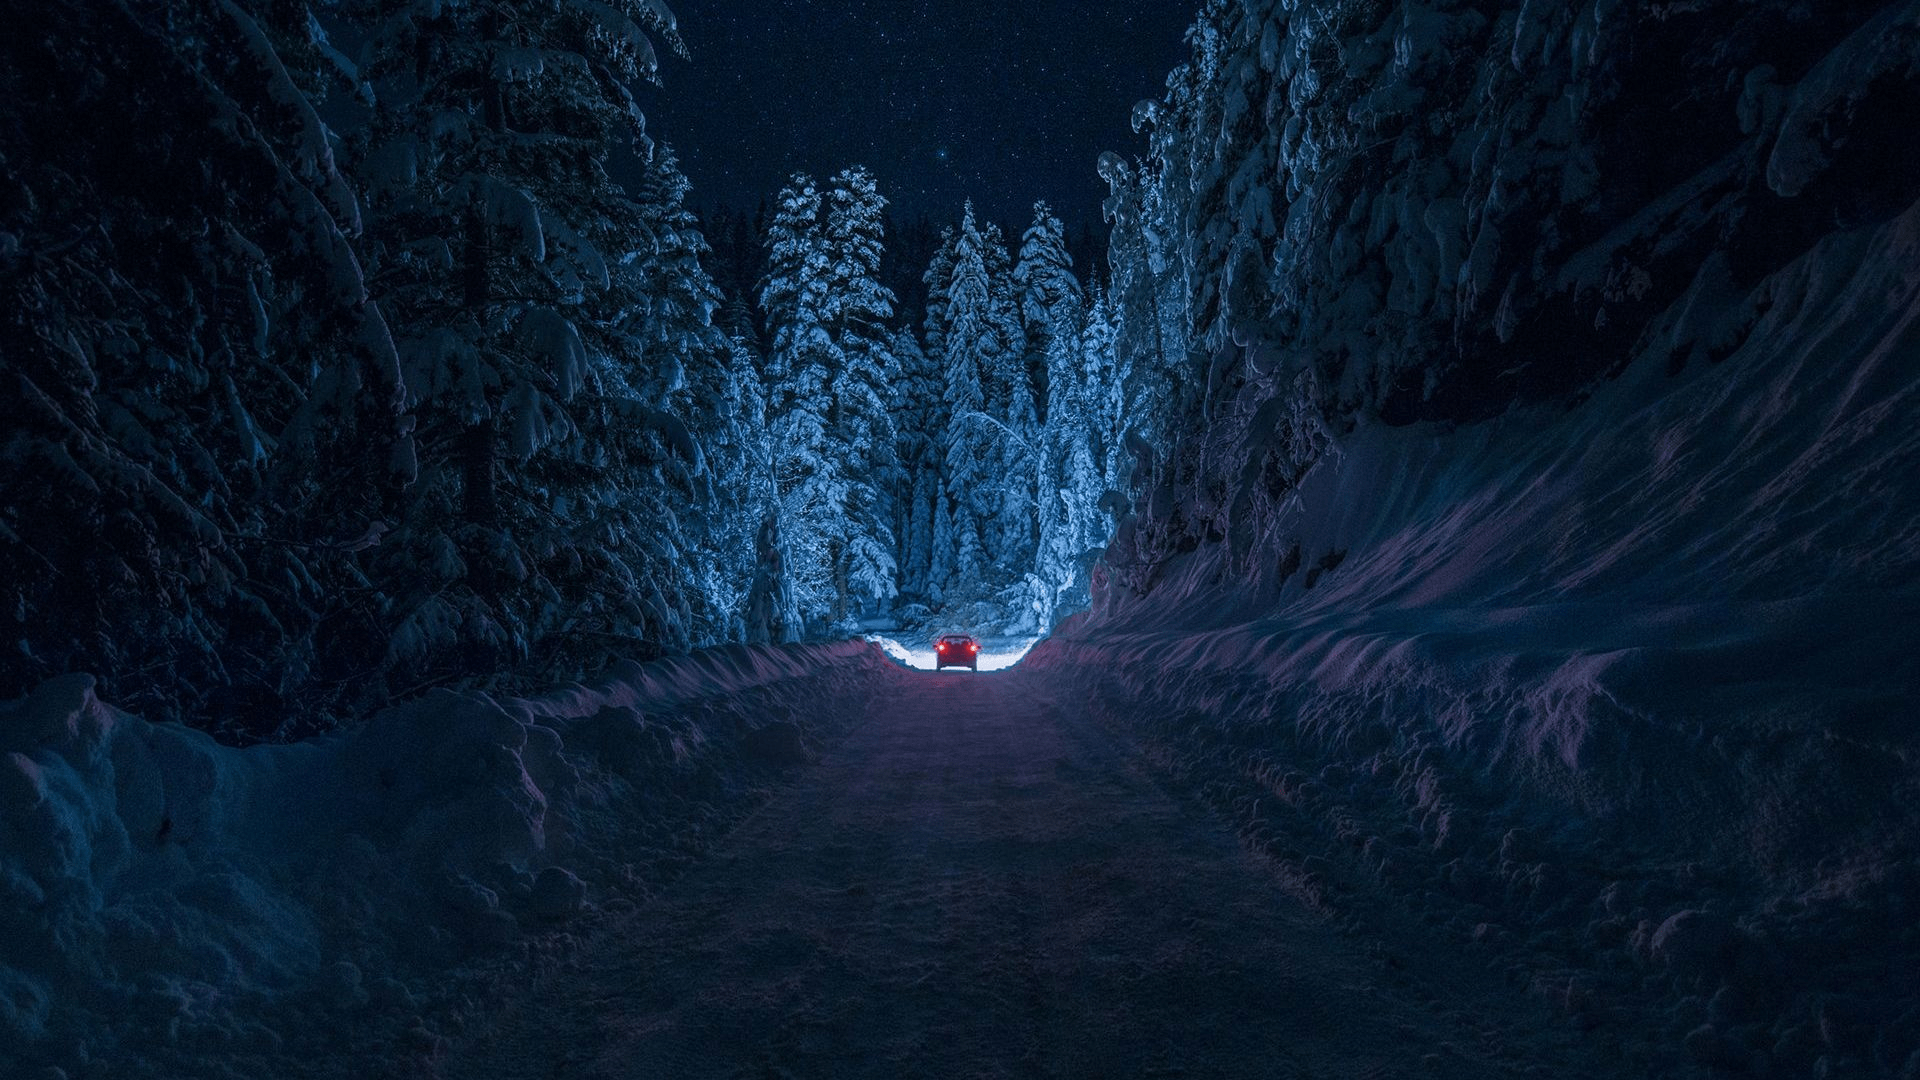 Person standing in the middle of a snowy forest at night - Dark blue, navy blue, 1920x1080